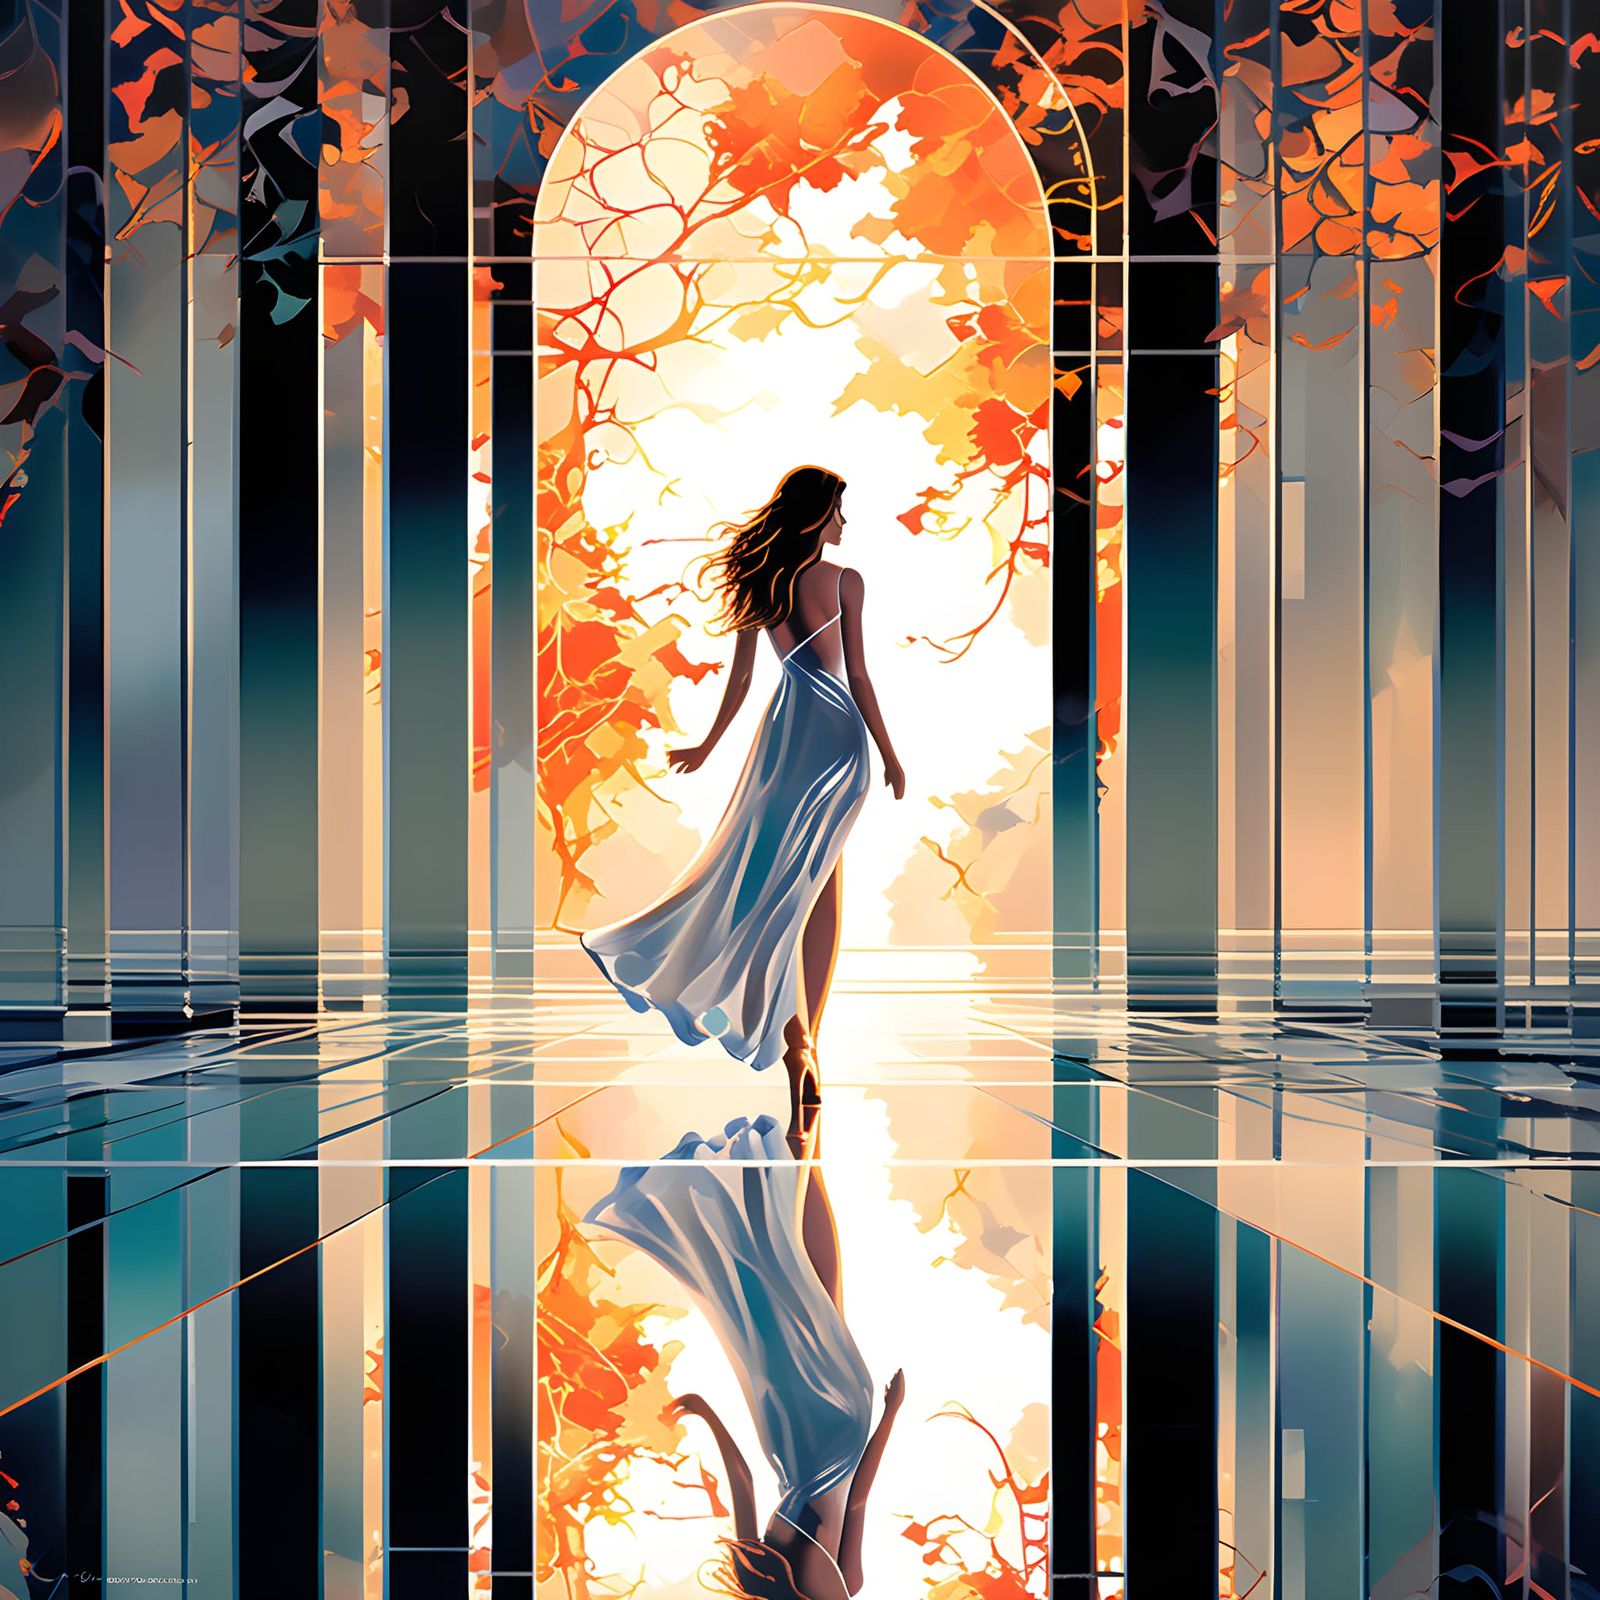 The reflection is a mesmerizing and enchanting portrayal of beauty and ...